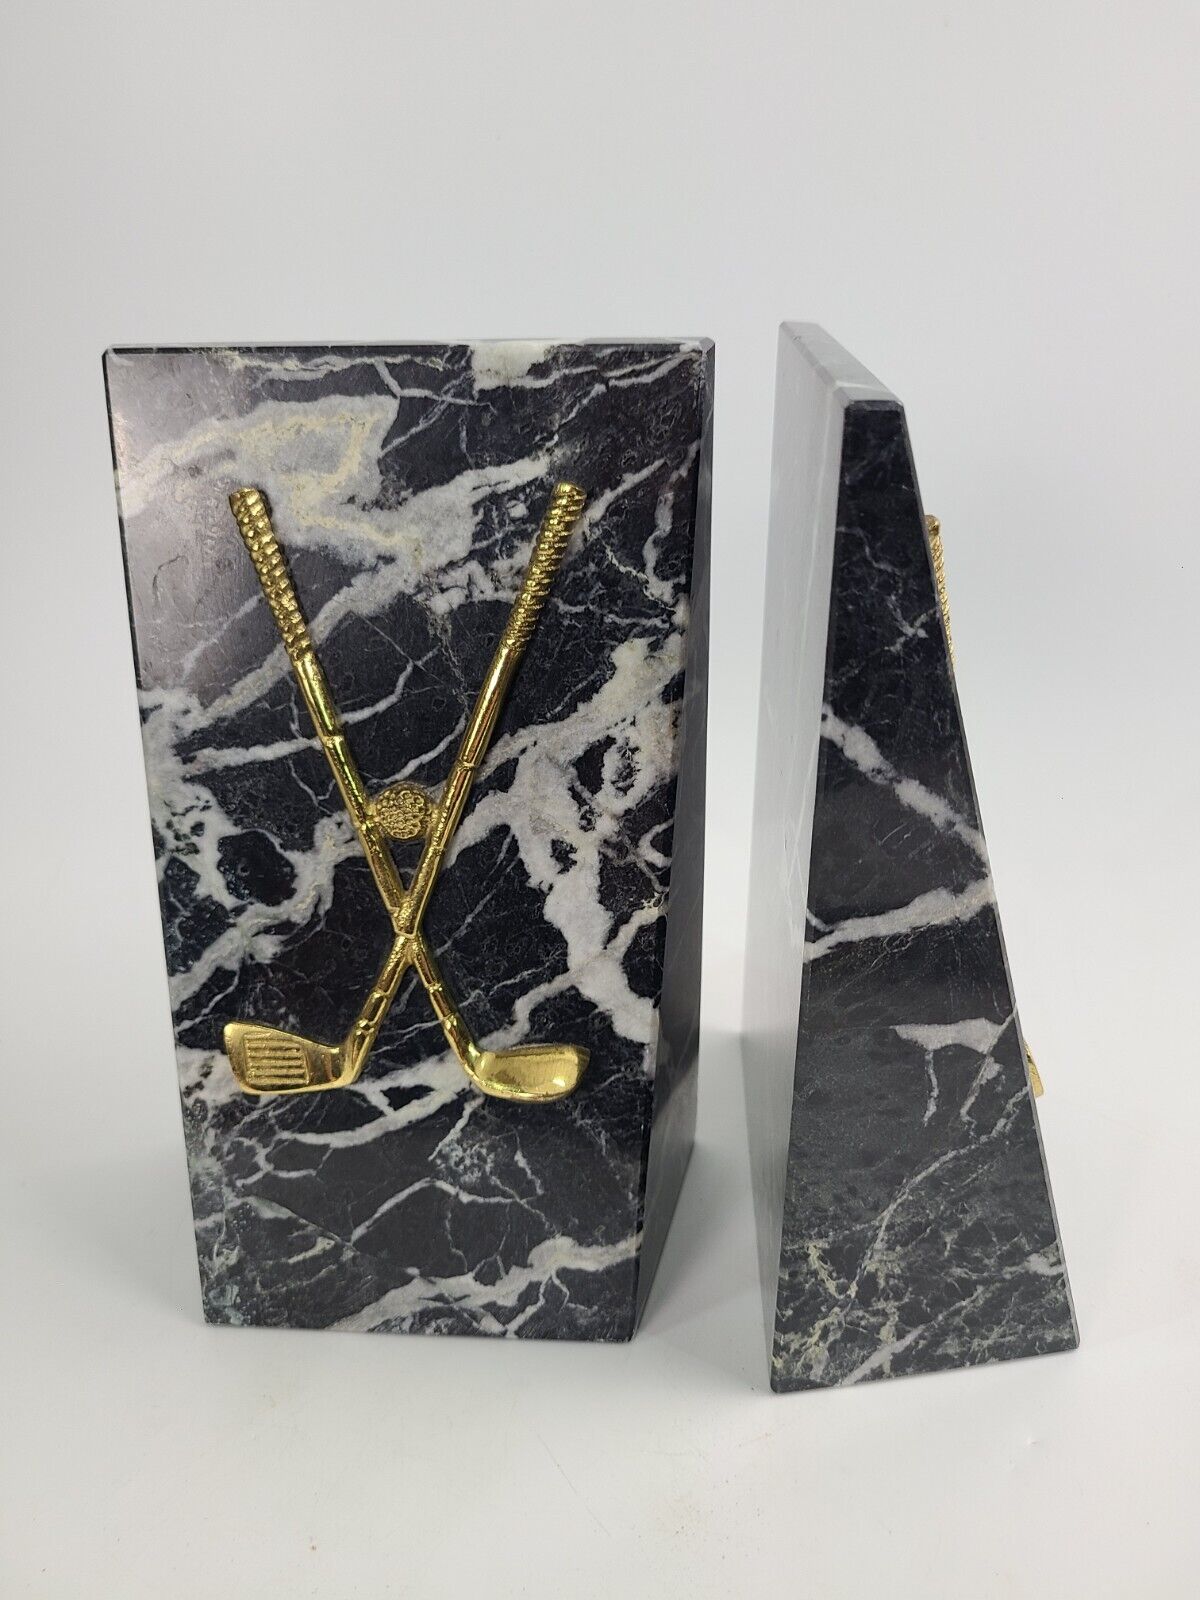 Pair of Vintage MCM Retro Art Deco Onyx or Marble Bookends with Golf Club Noymer